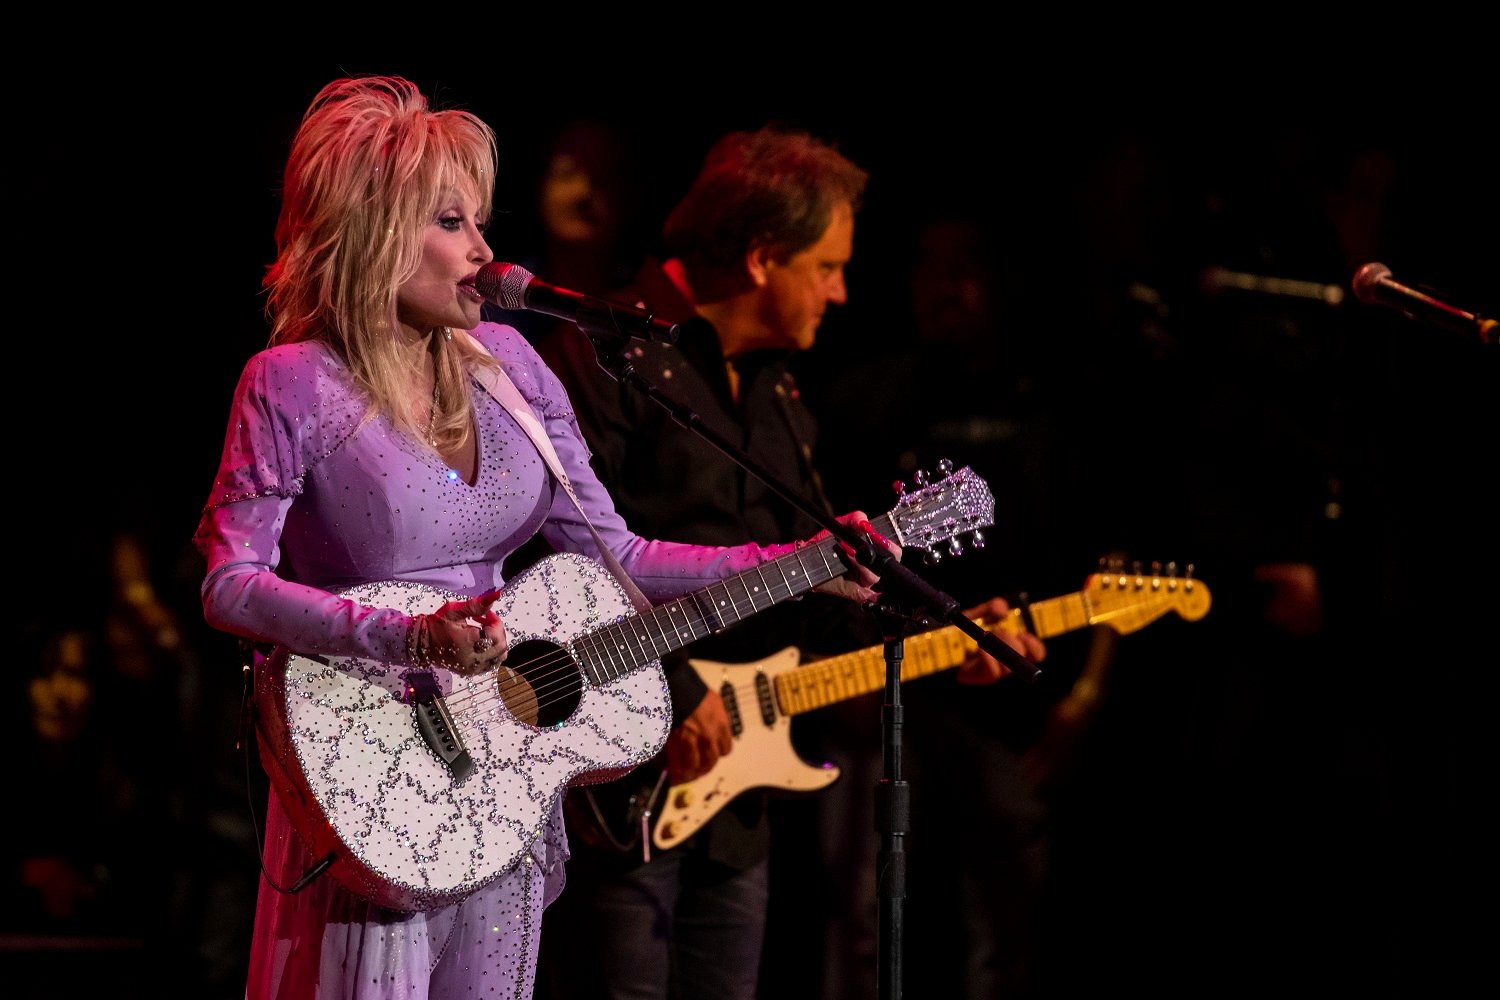 Dolly Parton performs during The Gift Of Music Concert at Ryman Auditorium on January 30, 2020 in Nashville, Tennessee.